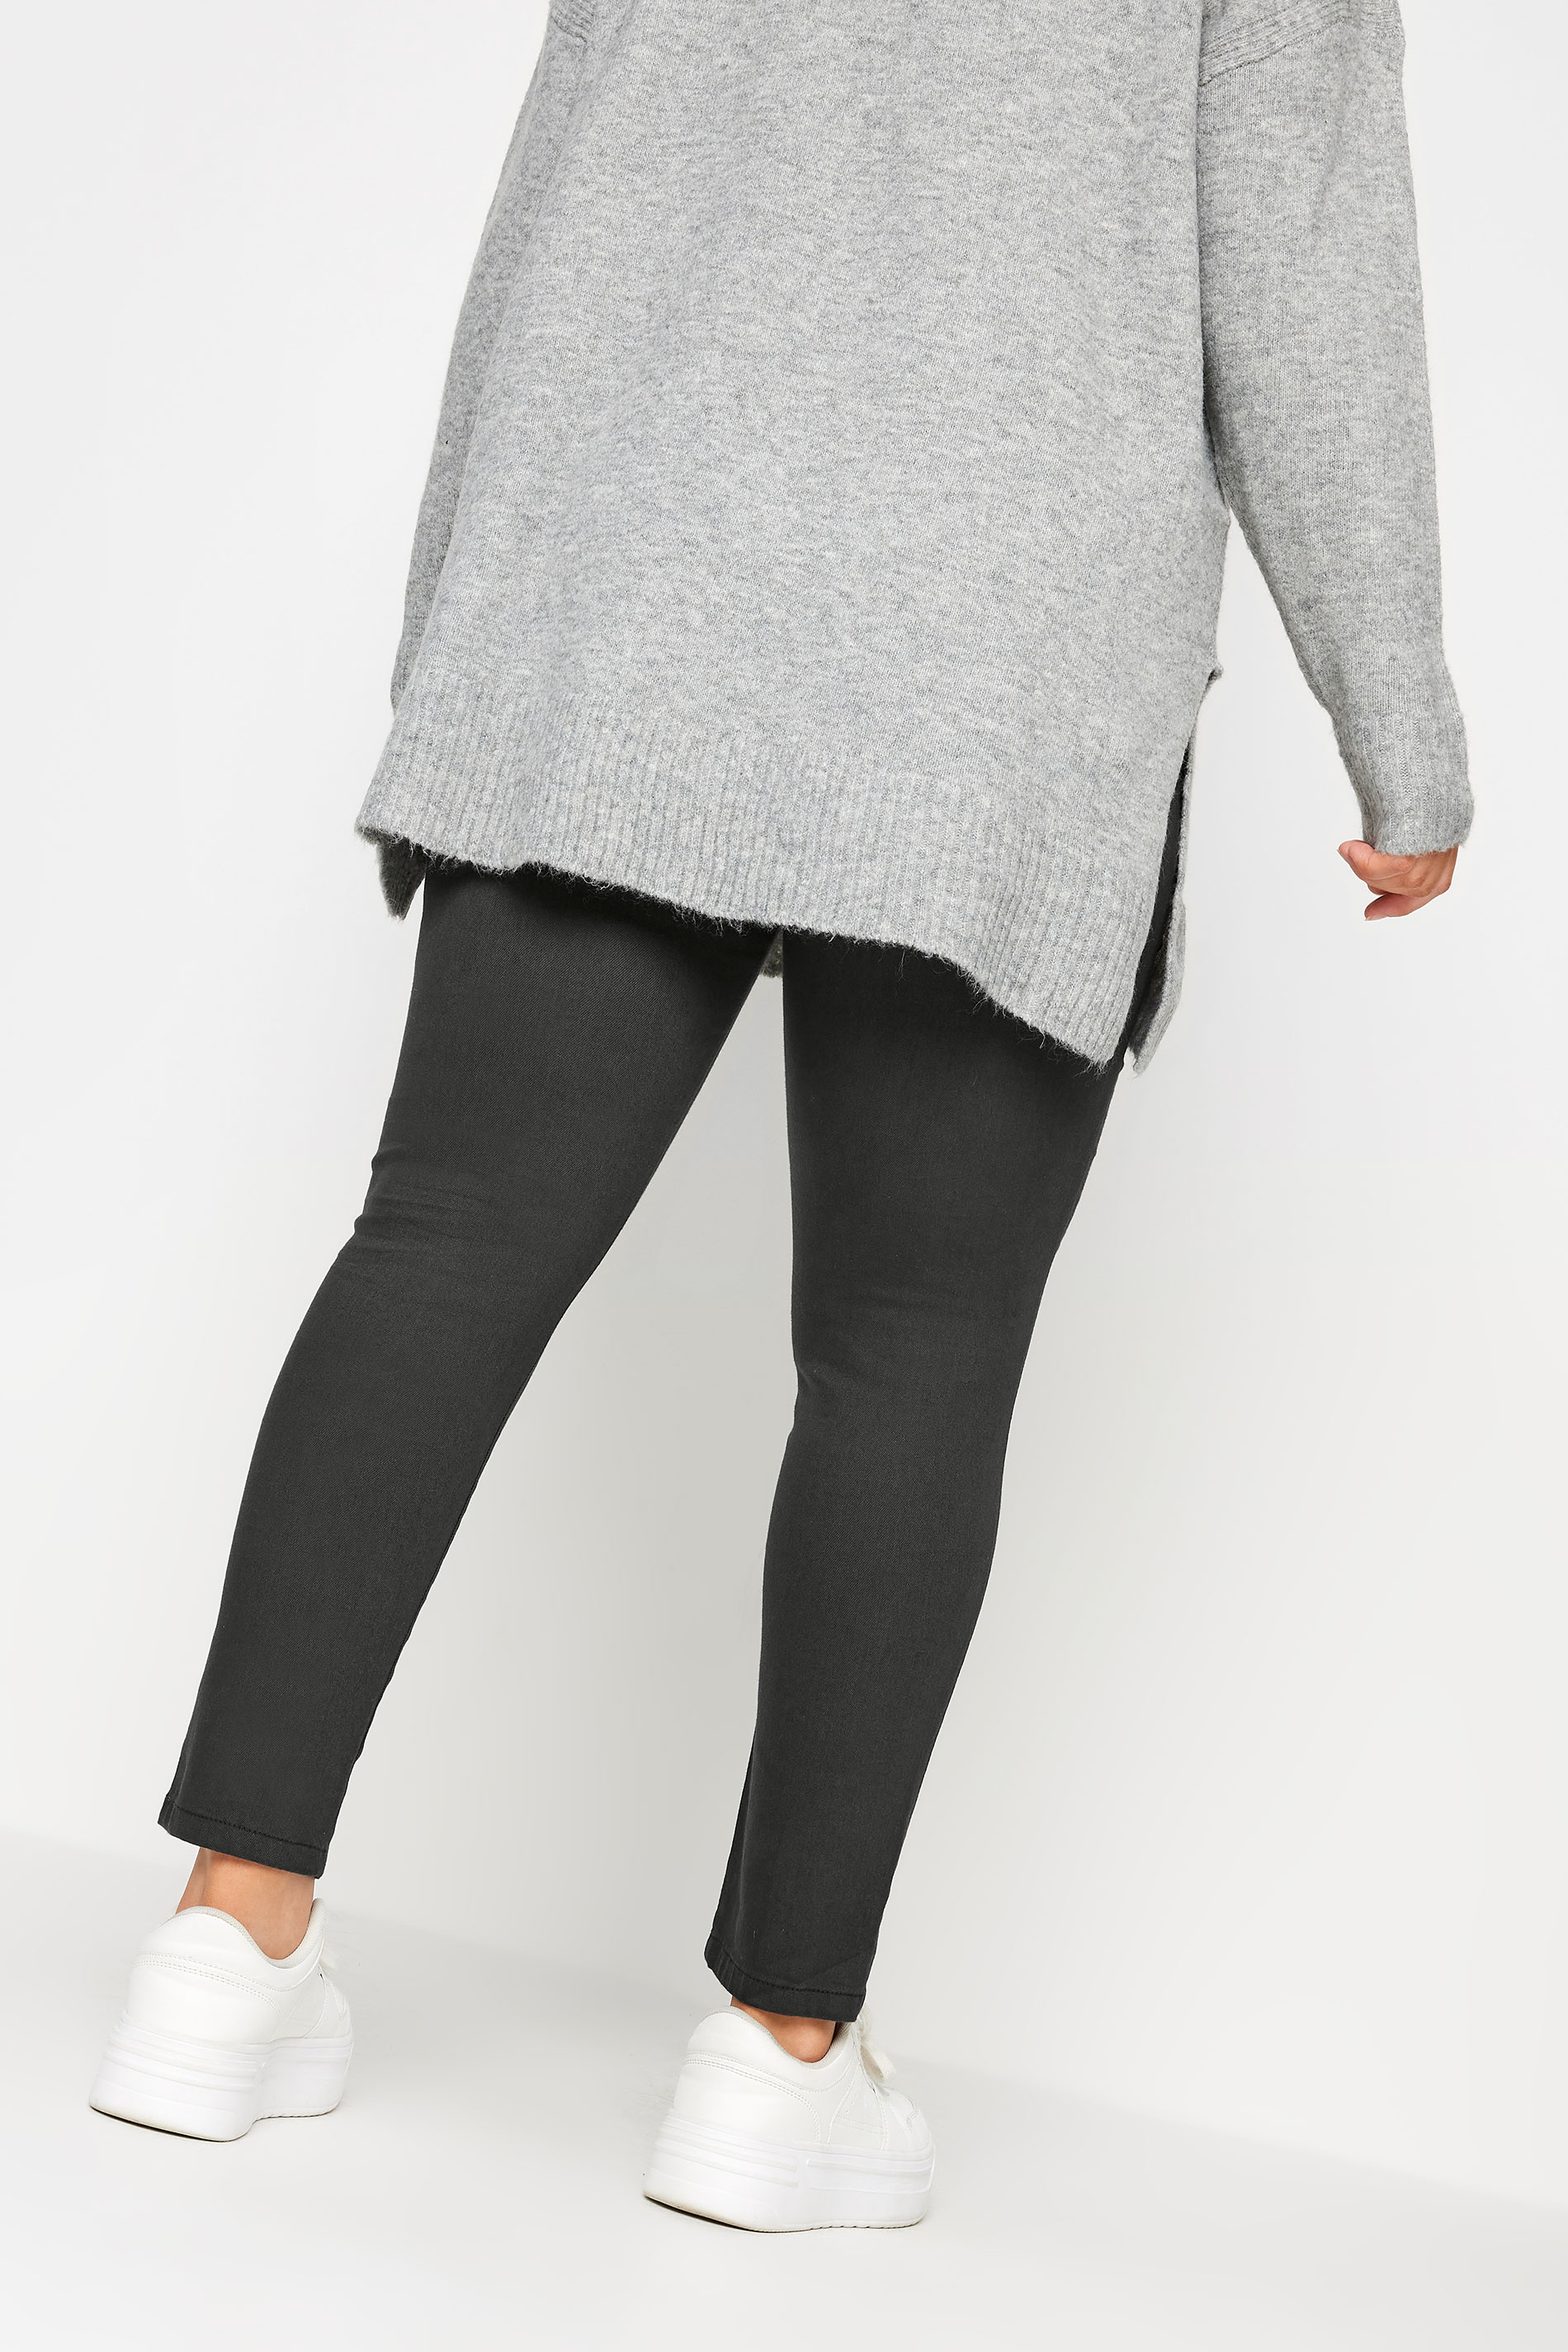 YOURS Plus Size Grey Stretch Pull On GRACE Jeggings | Yours Clothing 3